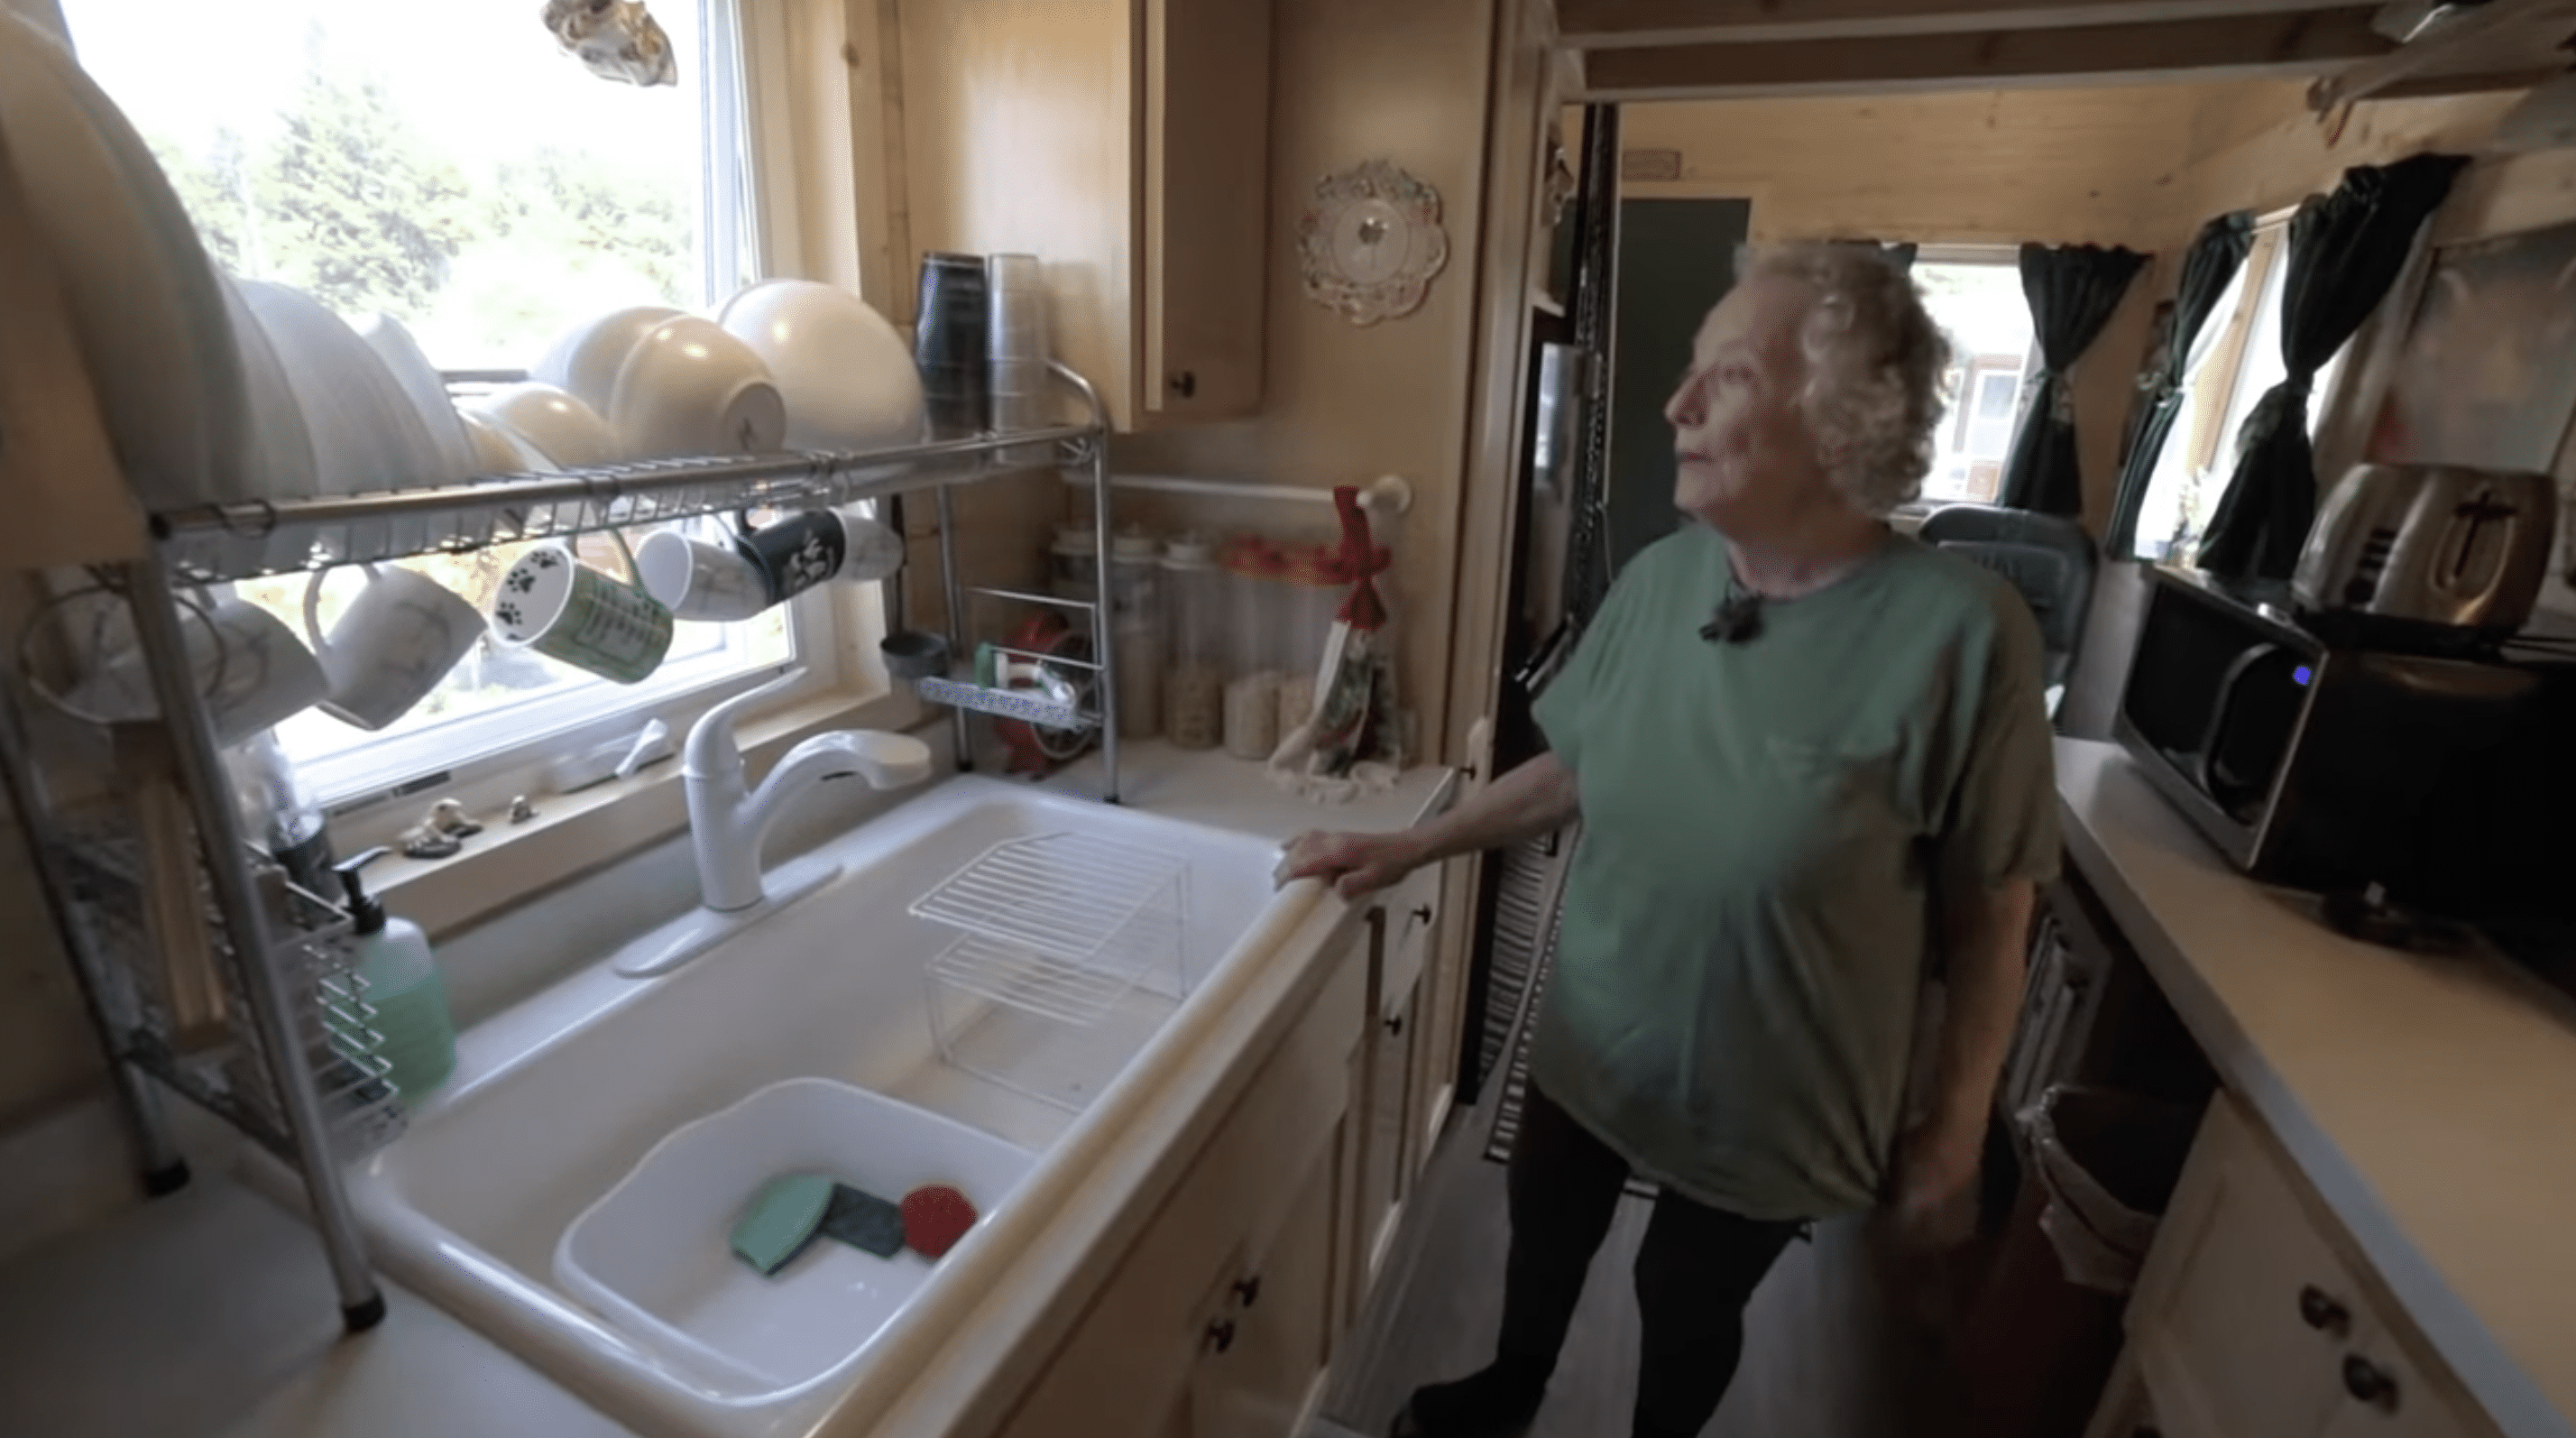 Penny shows her kitchen space. | Source: YouTube.com/TinyHomeTours